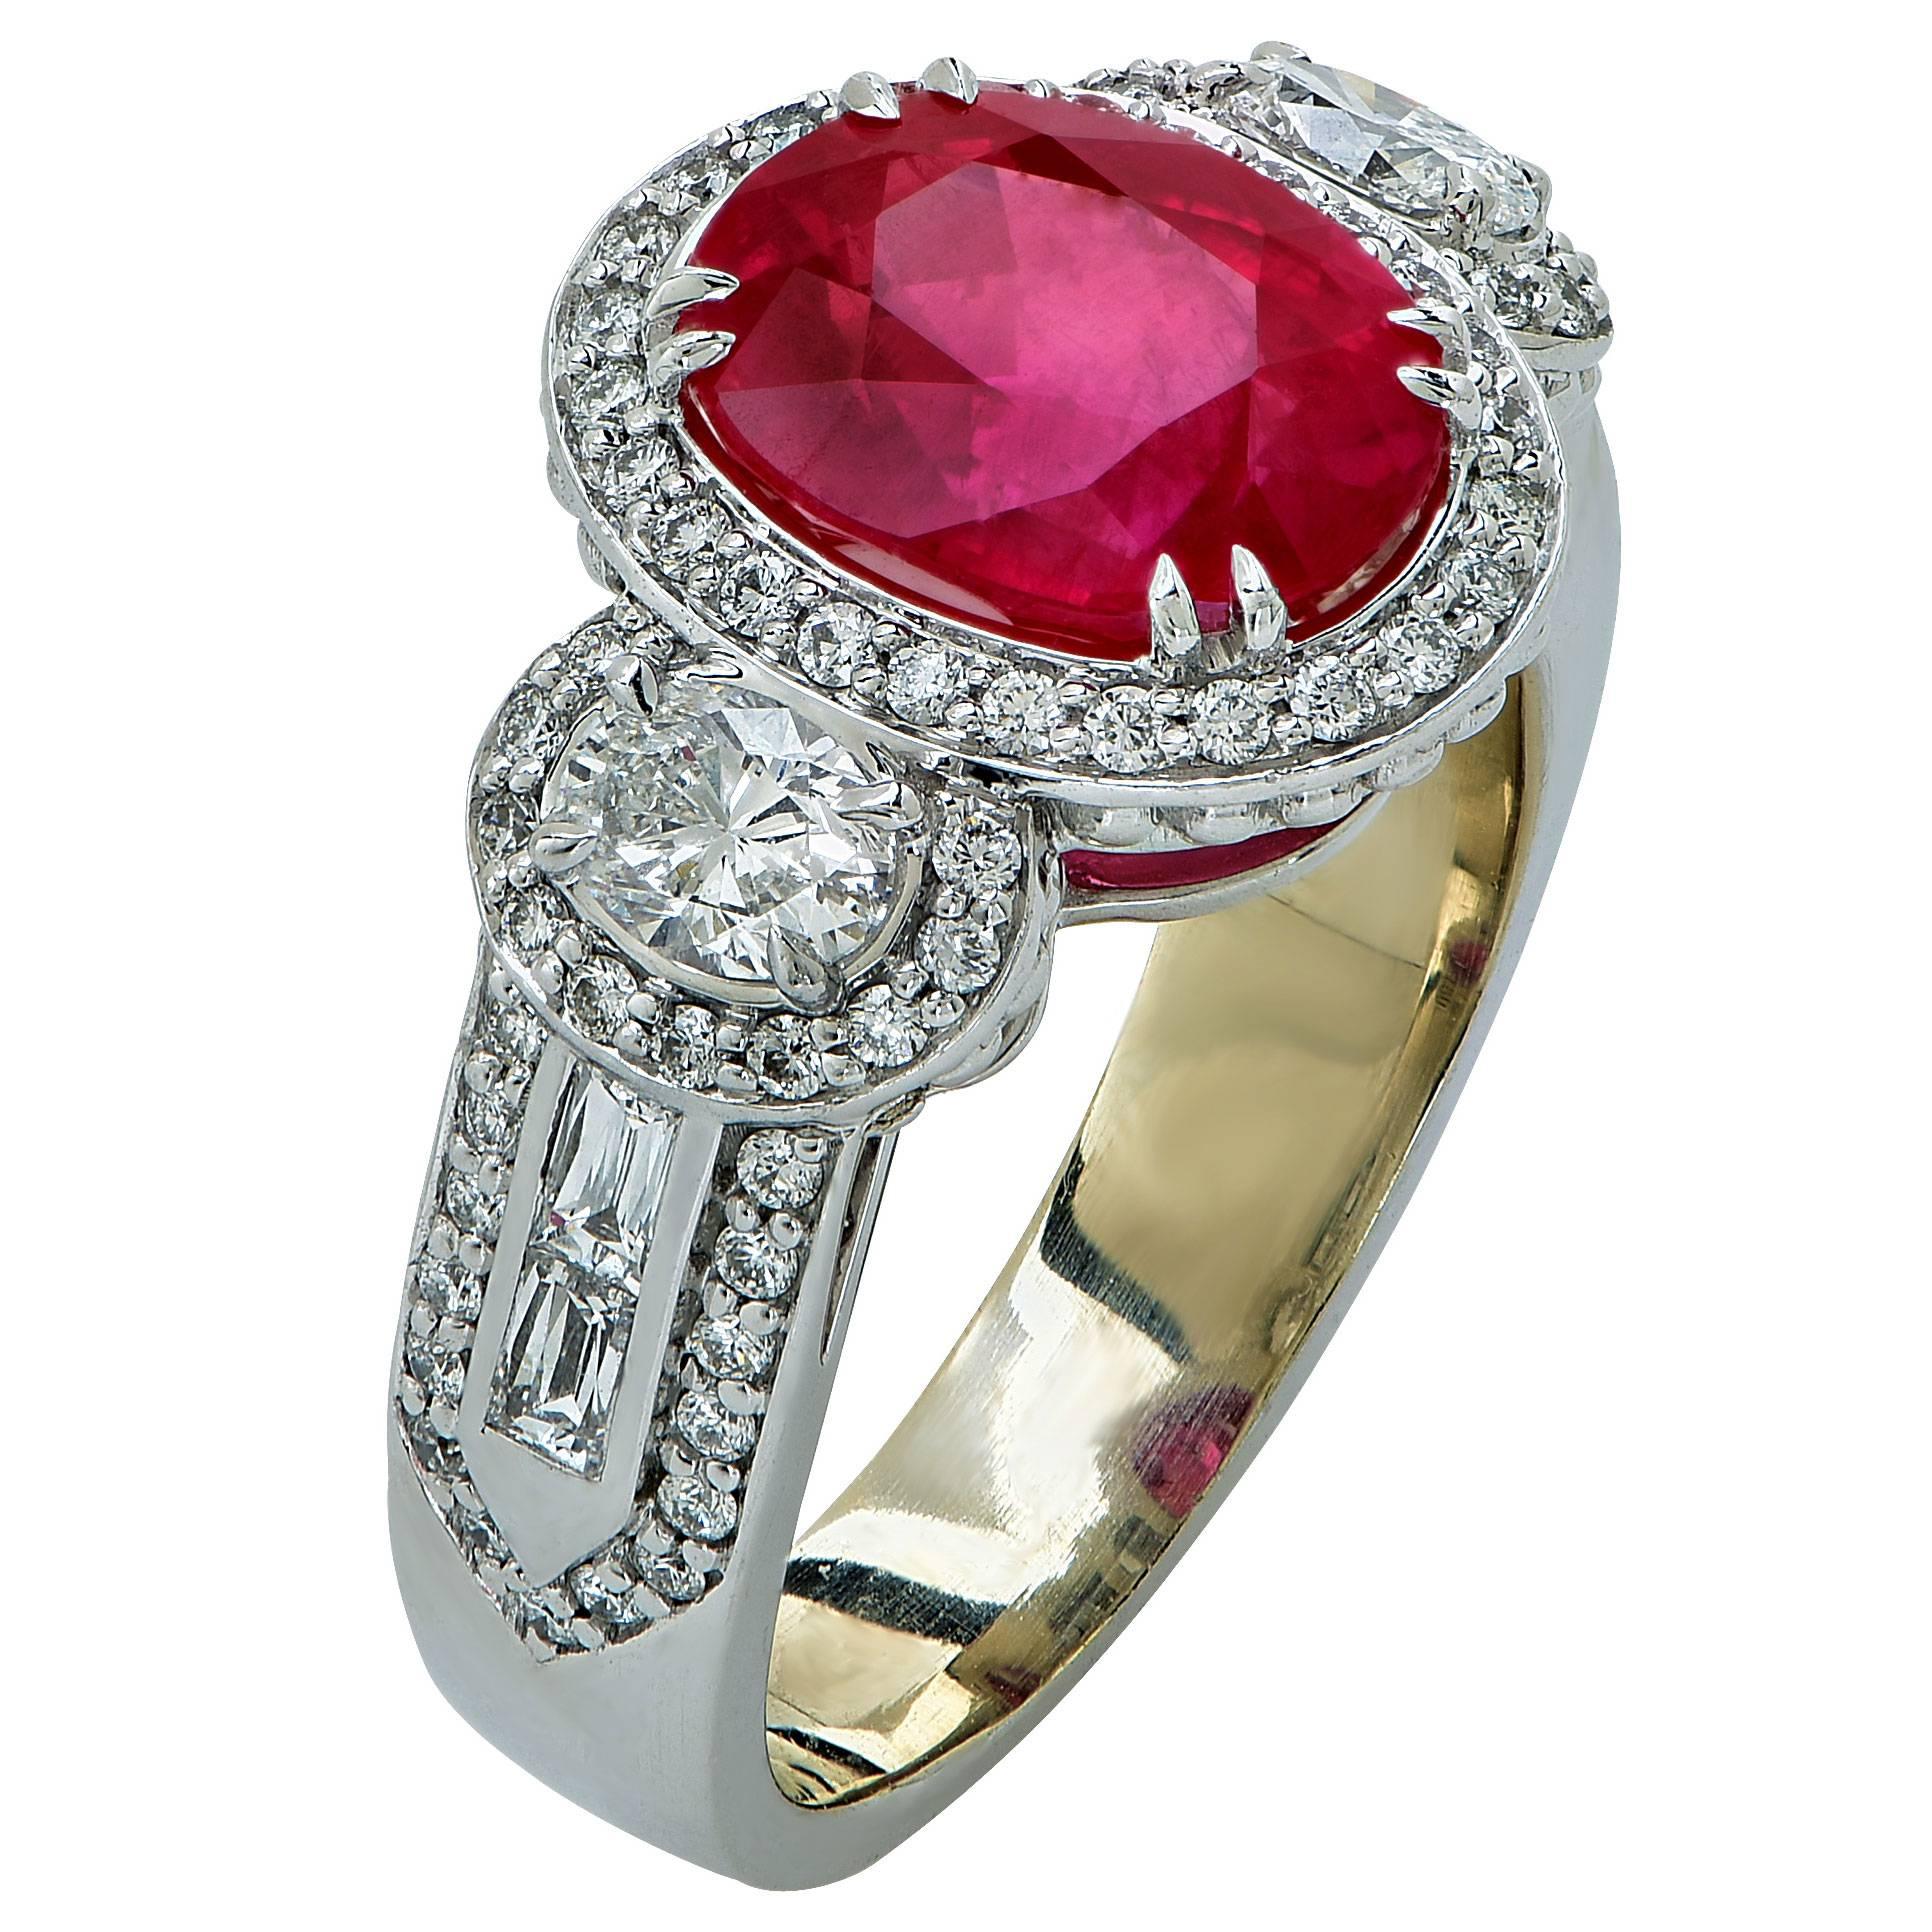 18k white gold ring featuring an oval cut ruby weighing approximately 3.50cts, accented by round brilliant, oval and baguette cut diamonds, F color, VS clarity. 

The ruby is accompanied by a GIA report stating that the origin is Madagascar with